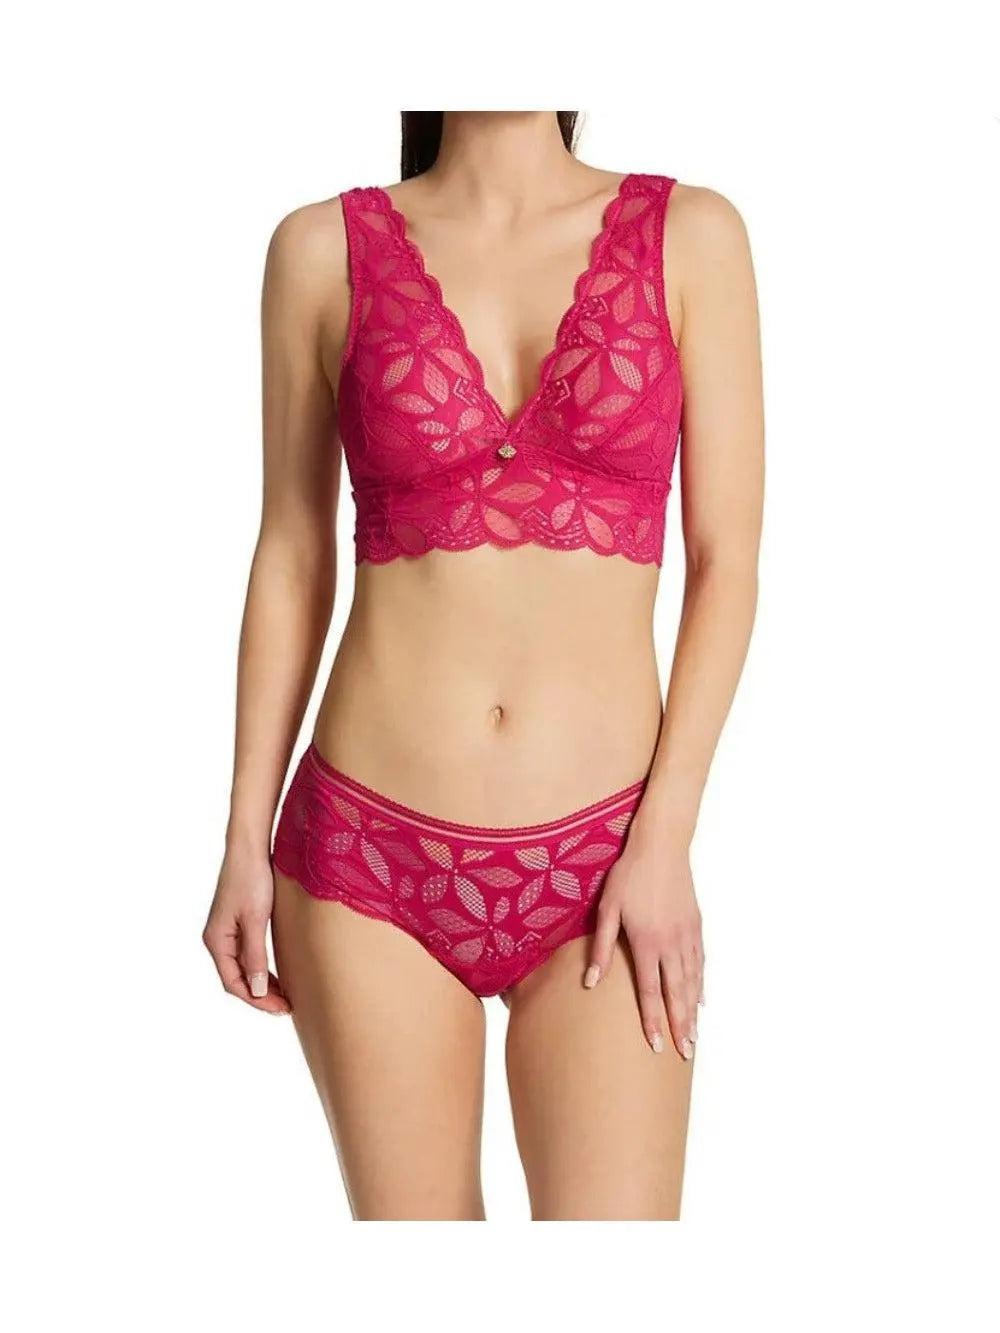 Complete the look with Fuchsia Stricto Sensuelle Bralette